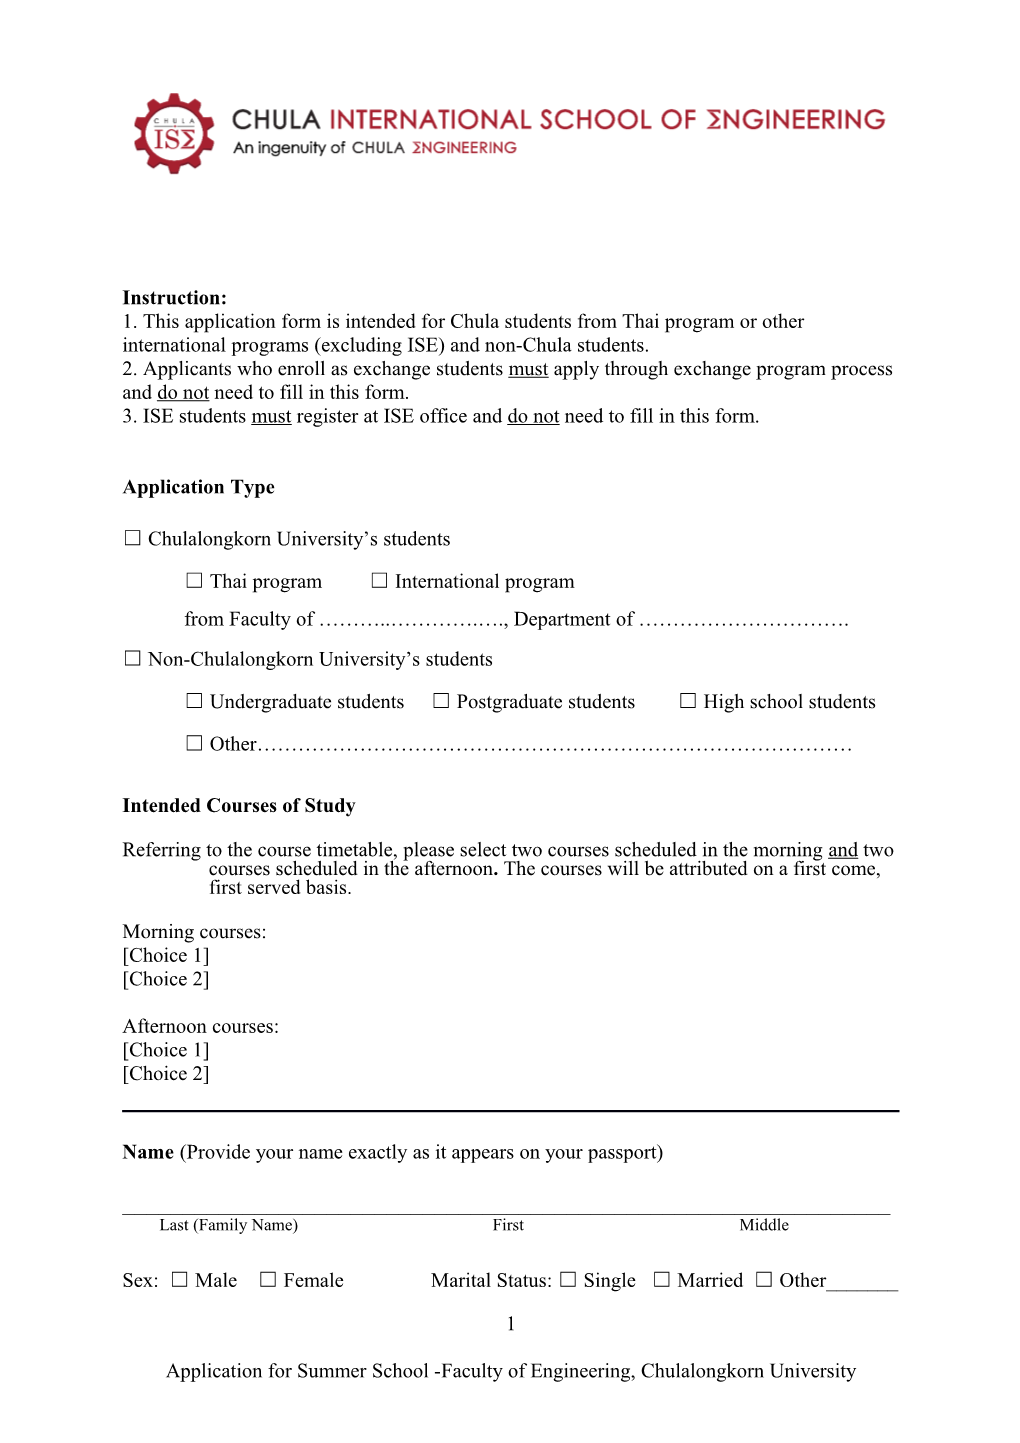 1. This Application Form Is Intended for Chula Students from Thai Program Or Other International